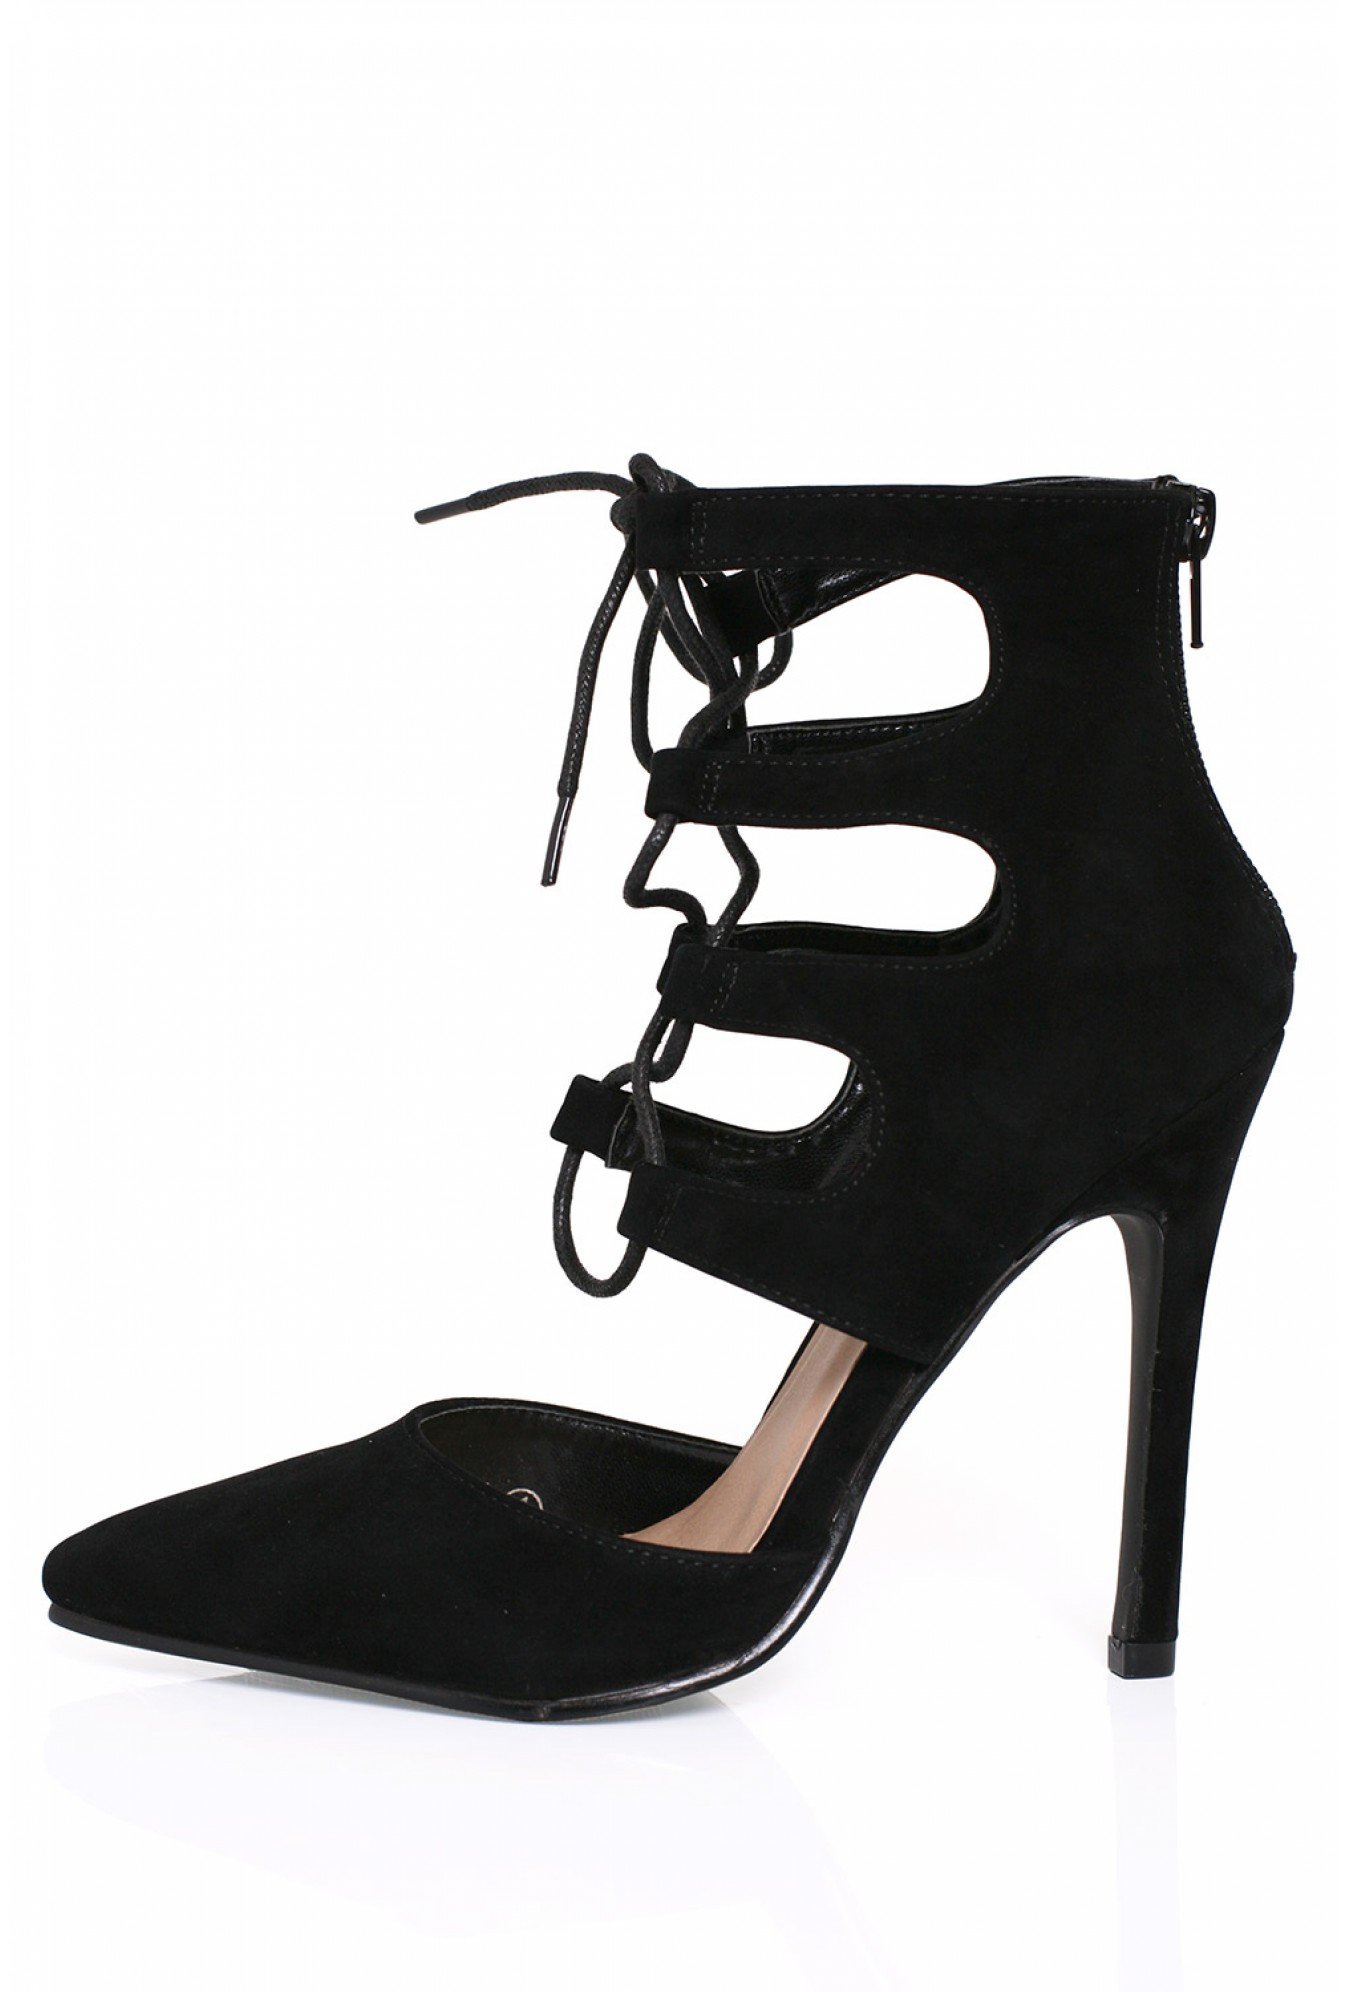 247 Sisi Lace Up Court Shoe in Black 